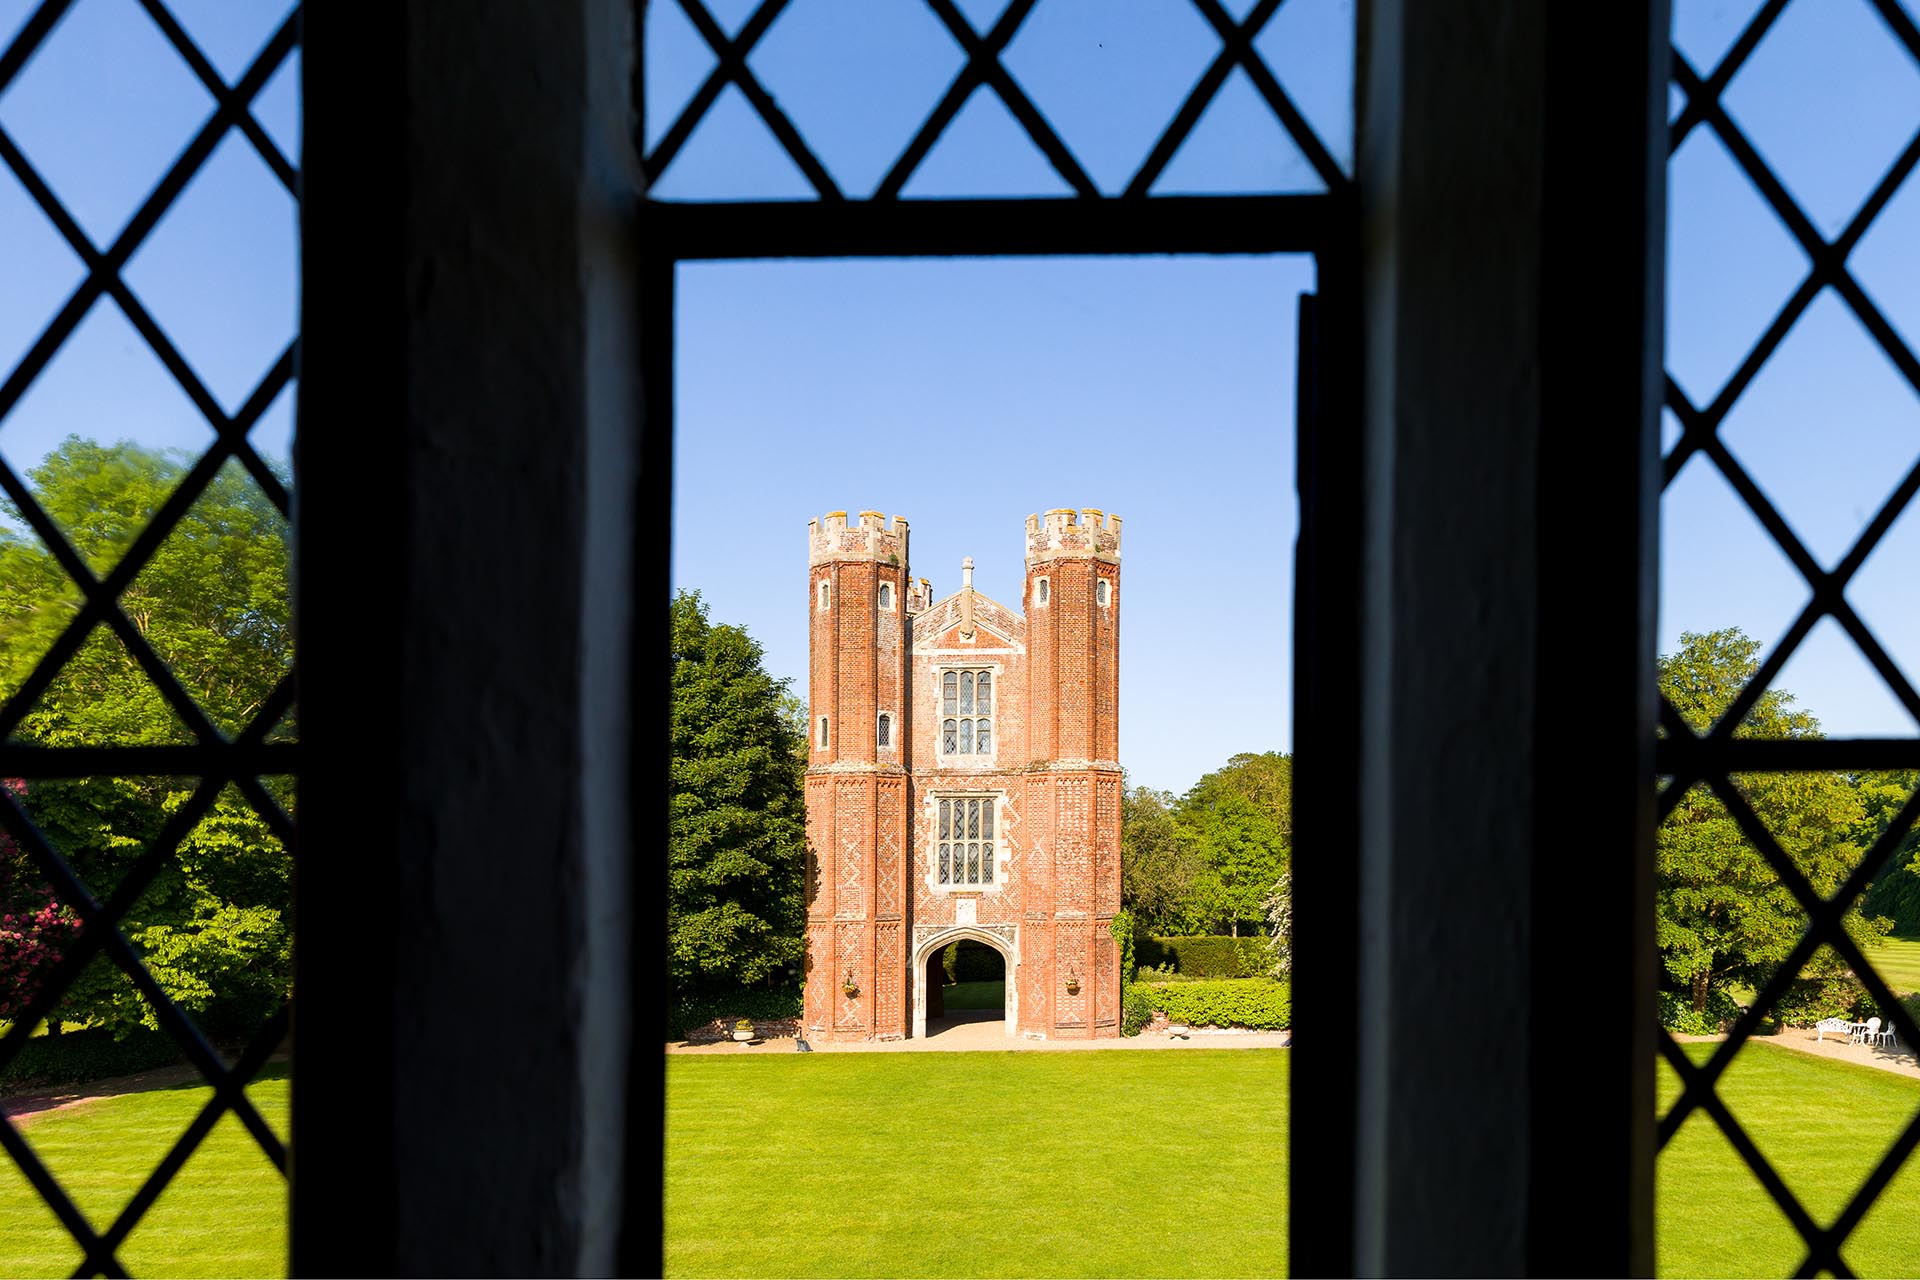 View from window of Leez Priory, Great Leighs, Chelmsford by Essex wedding photographer